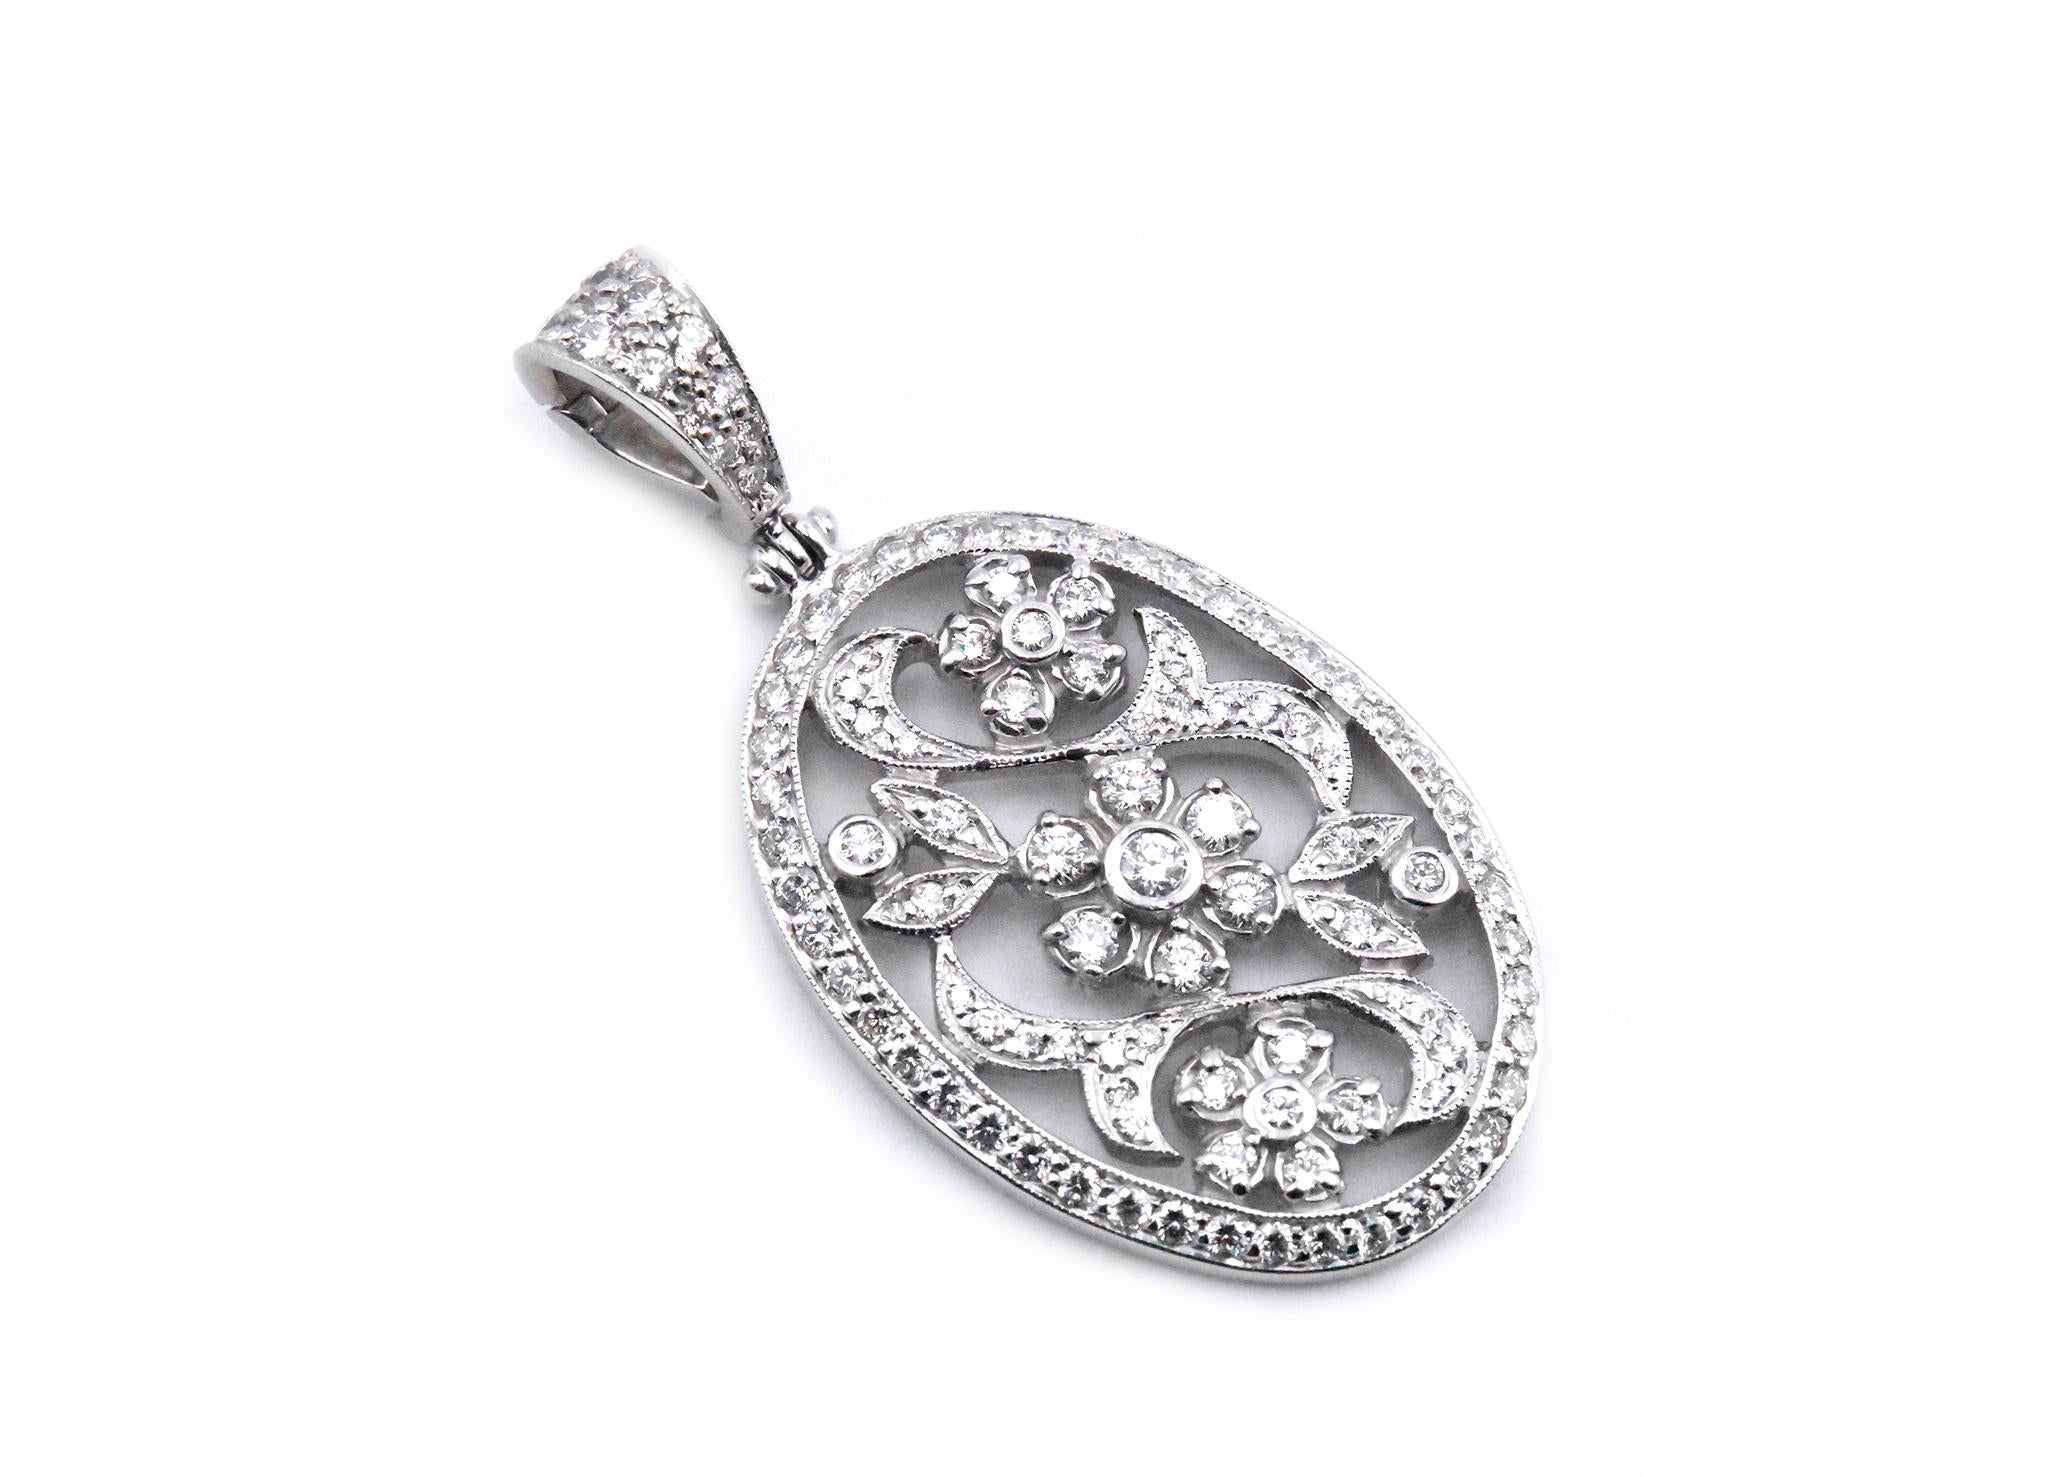 Designer: Penny Preville
Material: 18k white gold
Diamonds: 1.54cttw round cut 
Color: G
Clarity: SI1
Dimensions: Pendant measures 43.75 X 22.15mm
Weight: 8.89 grams